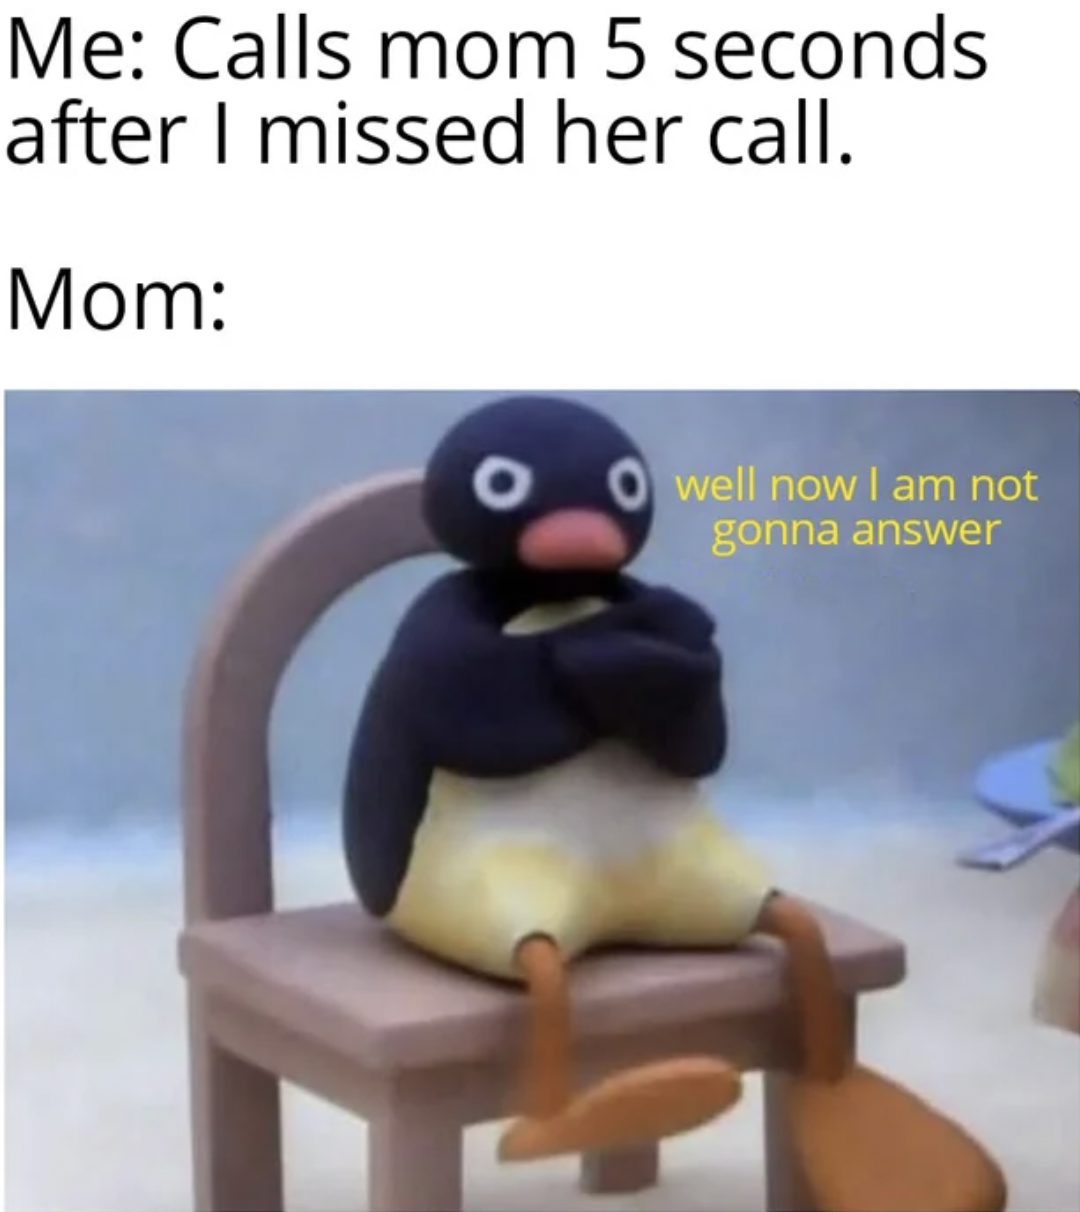 Dank Memes - don t like being told - Me Calls mom 5 seconds after I missed her call. Mom O well now I am not gonna answer